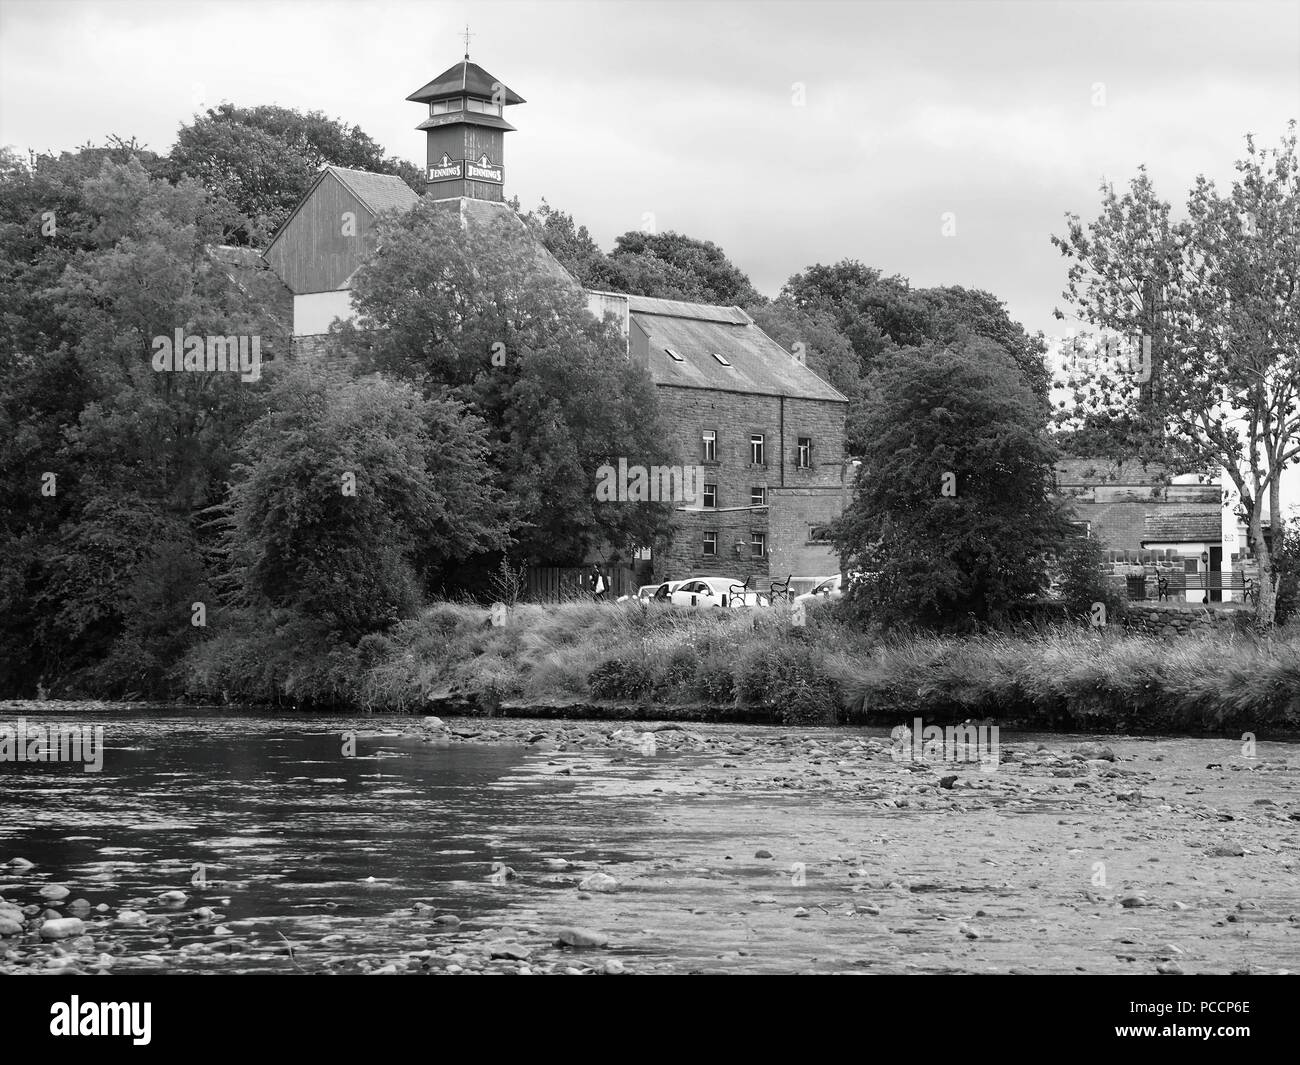 The Buildings of Jennings Brewery from across the River Derwent, Cockermouth, Cumbria, United Kingdom Stock Photo